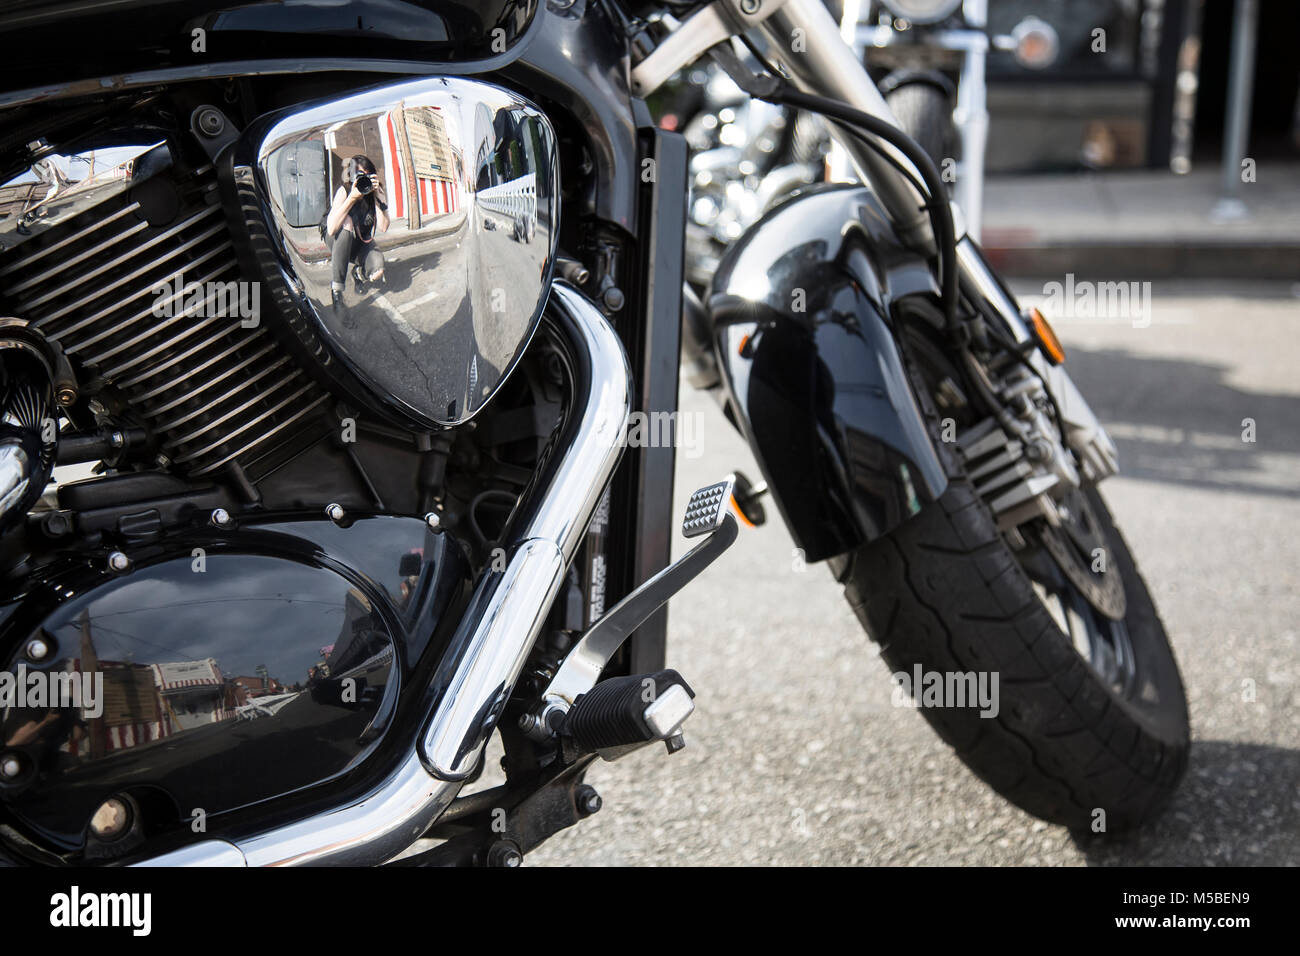 A motorcycle is a prop in the F/W 18 Fashion show by Ashton Michael in Hollywood, CA Stock Photo